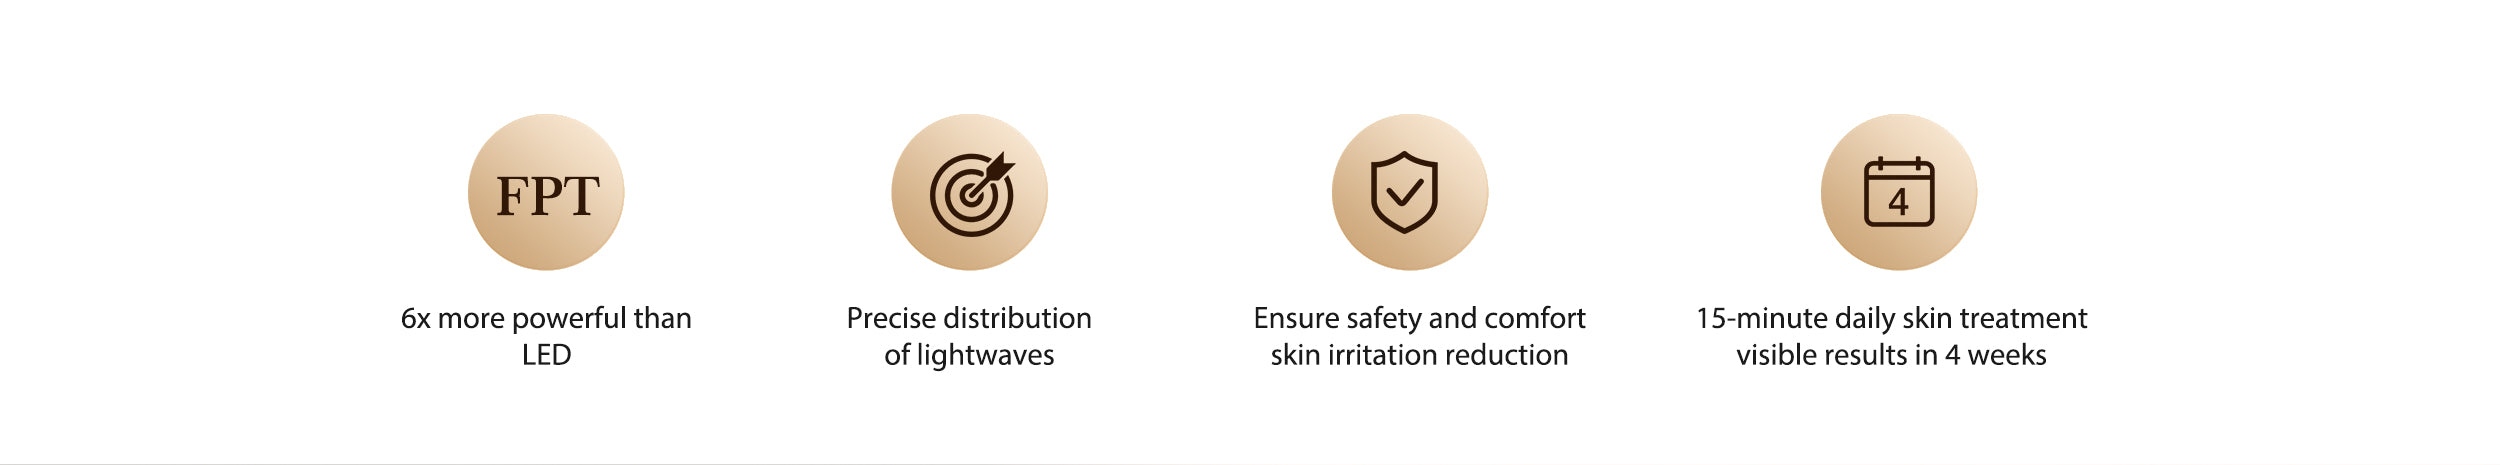 Feature icons for JOVS 4D Laser Light Therapy Mask highlighting FPT technology's power over LED, precise lightwave distribution, safety for skin, and 15-minute treatments with results in 4 weeks.